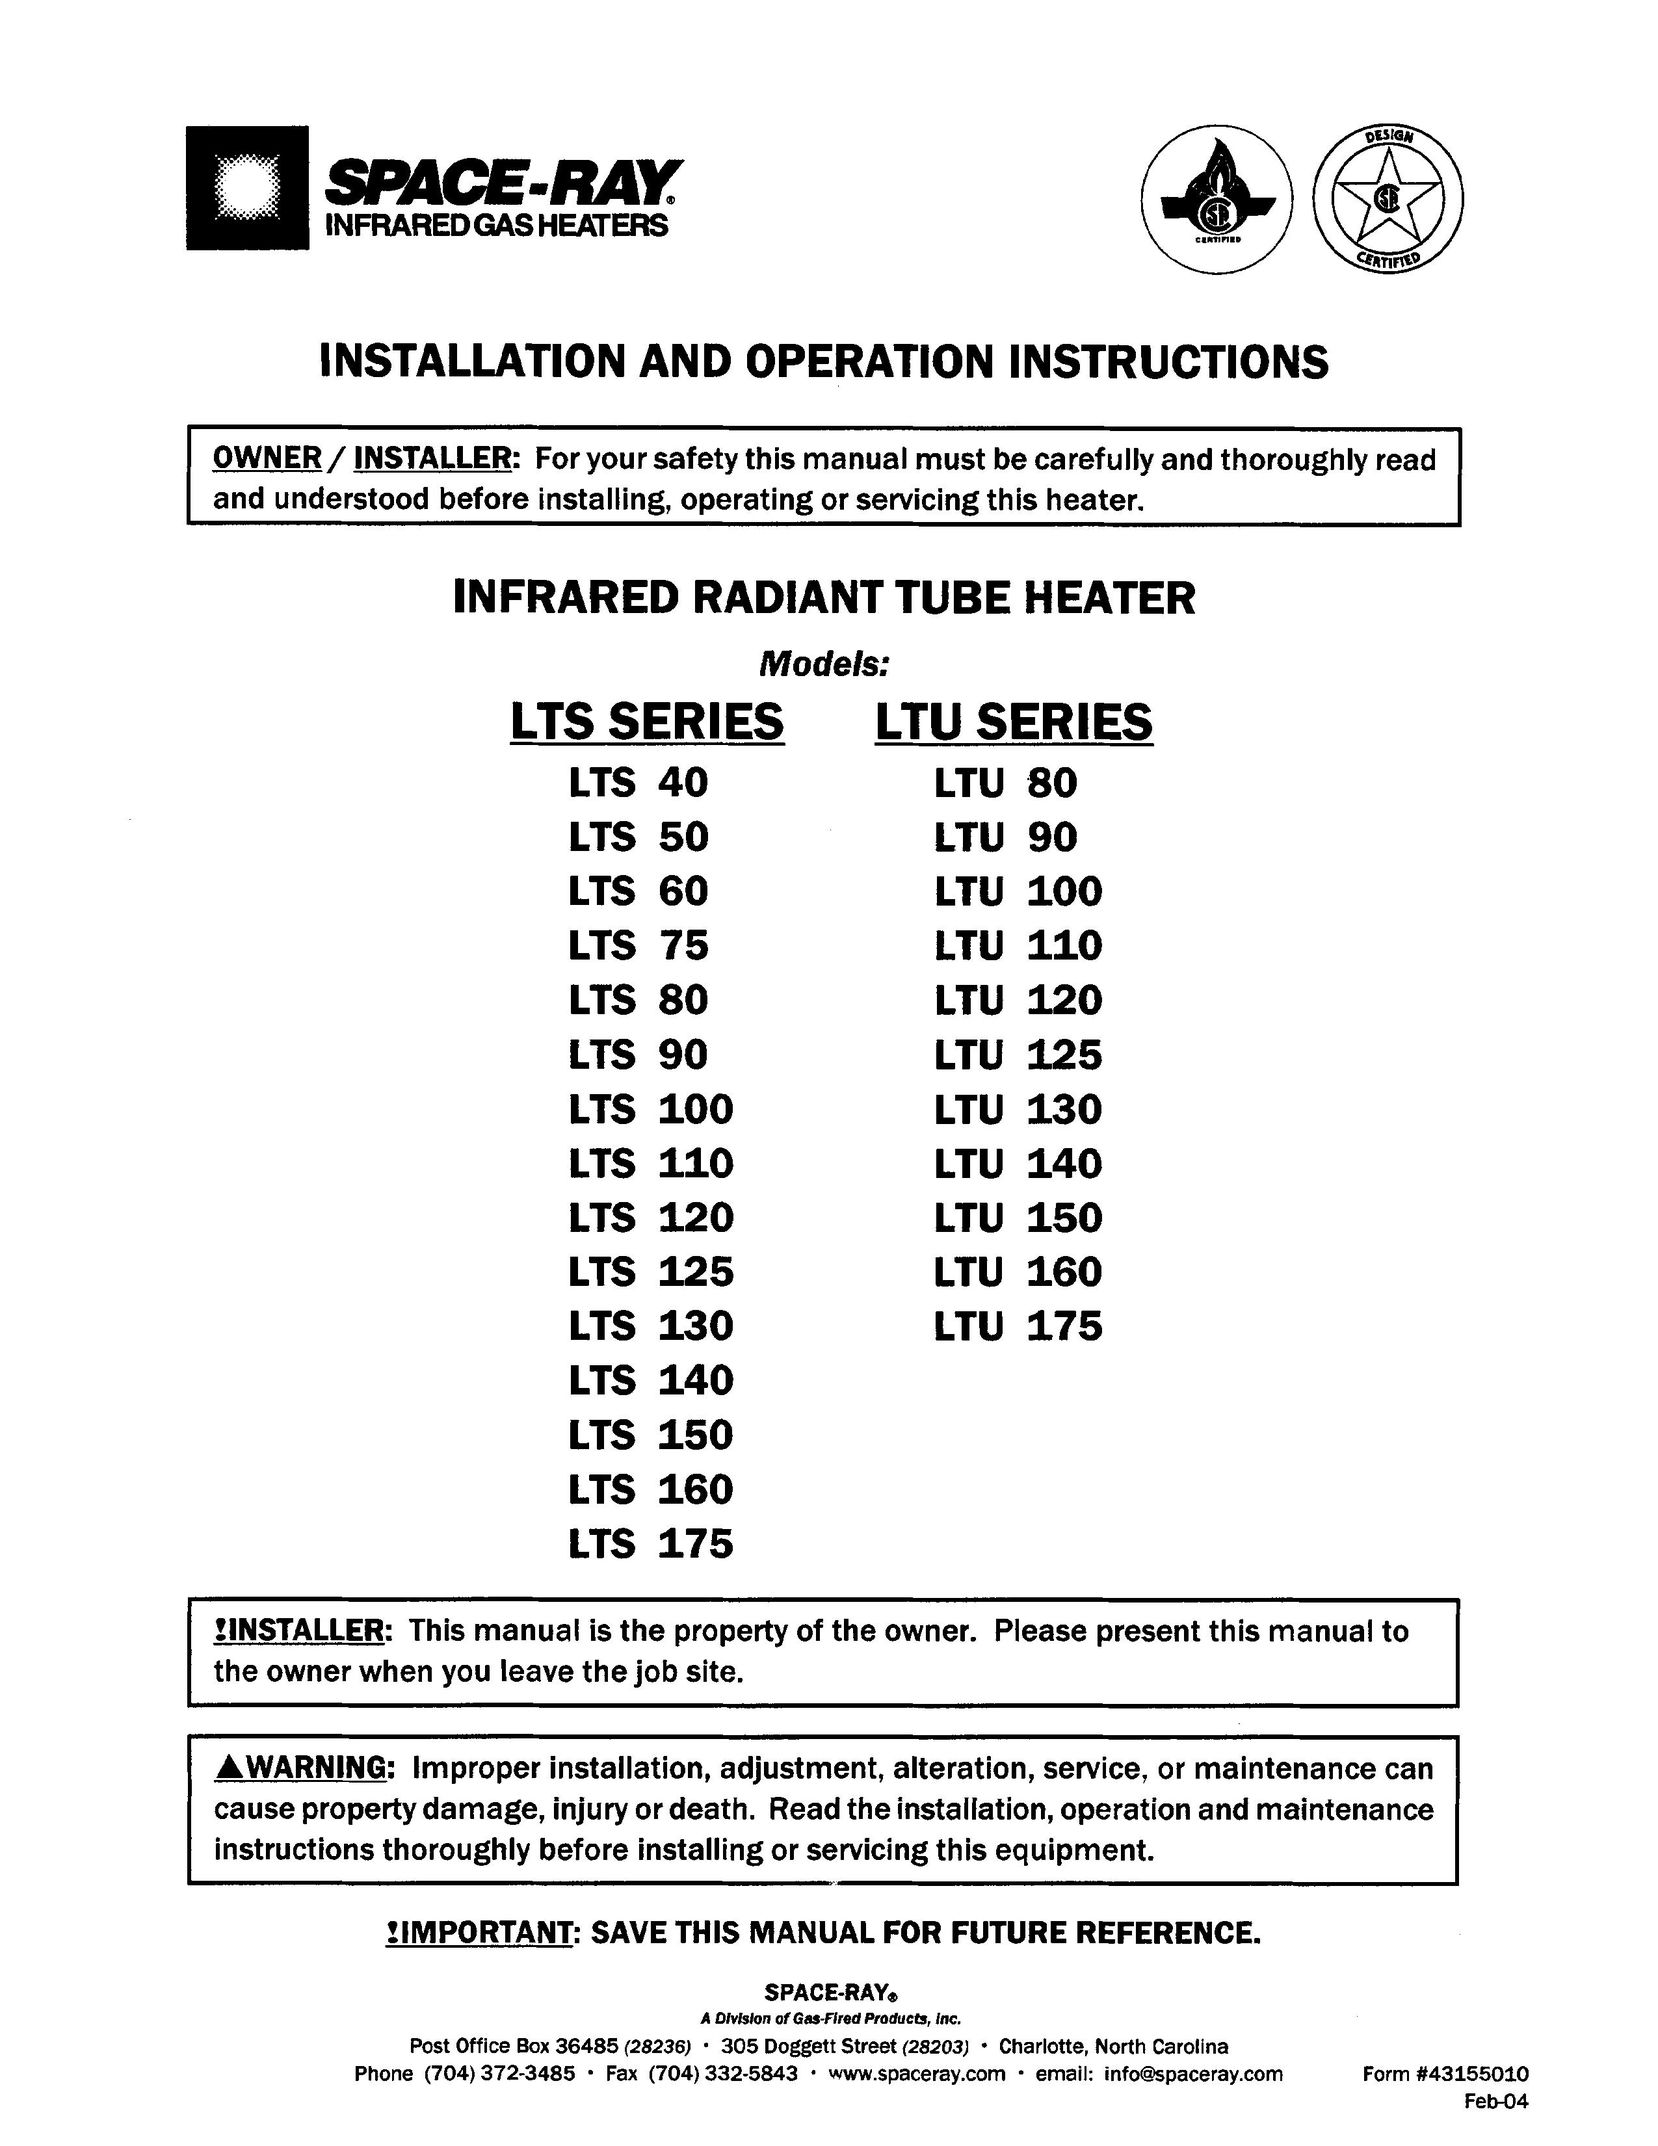 Gas-Fired Products LTS 140 Electric Heater User Manual